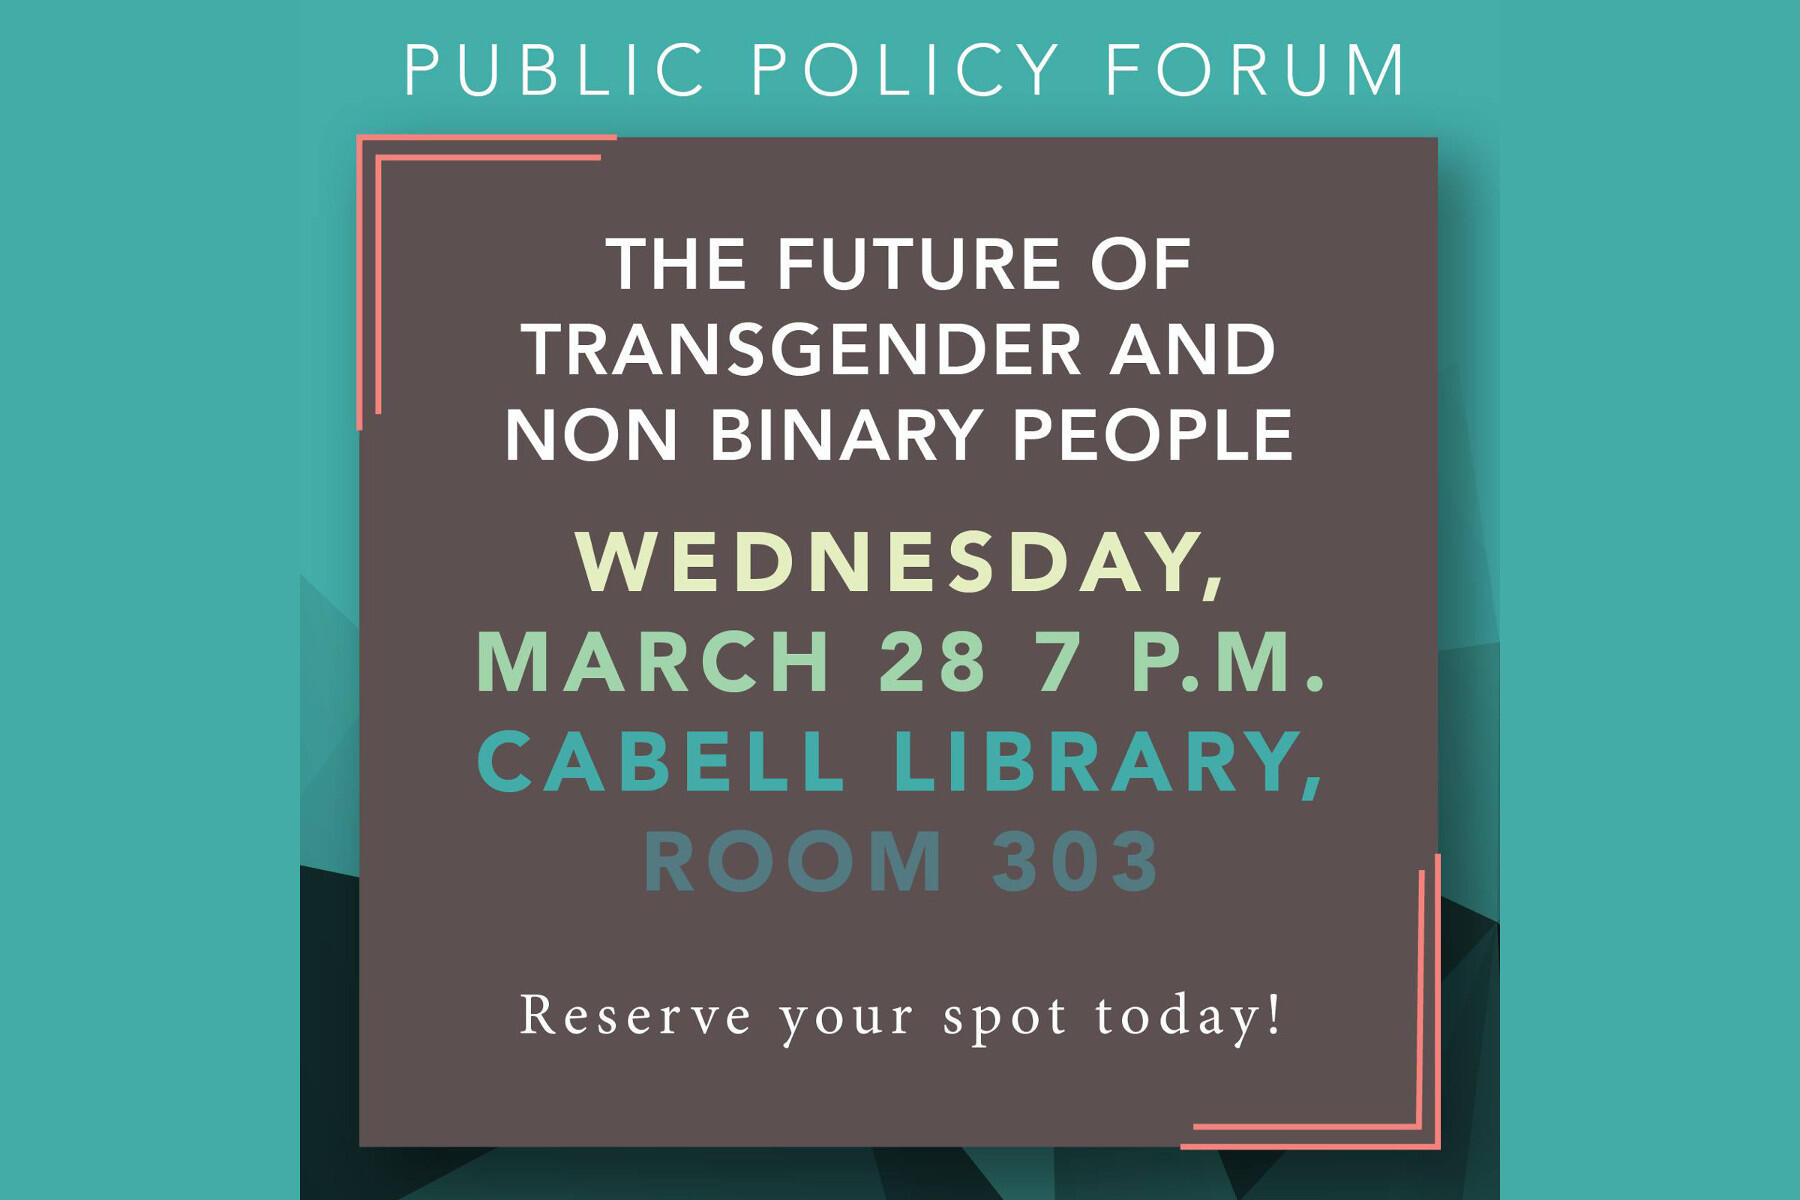 Poster reading "Public Policy Forum - The future of transgender and non binary people - Wednesday, March 28, 7 p.m. Cabell Library Room 303 - Reserve your spot today!"